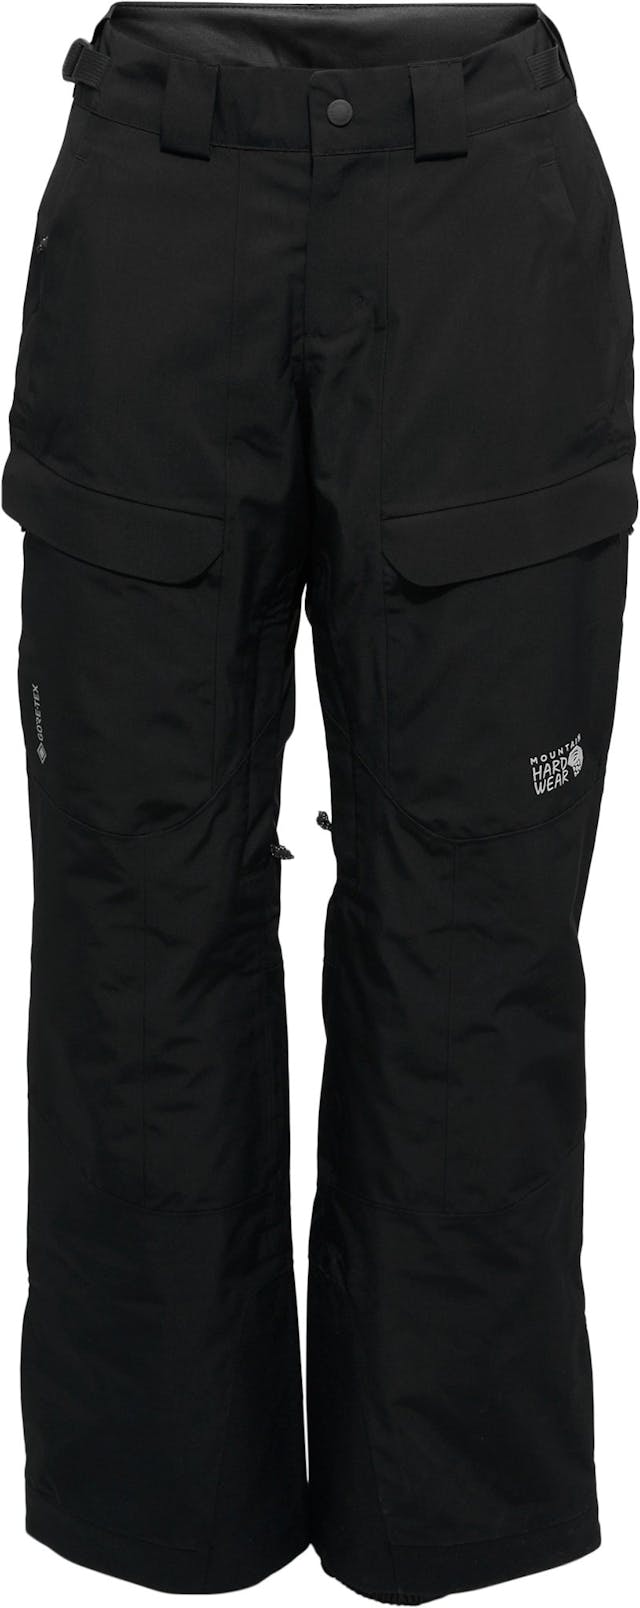 Product image for Cloud Bank GORE-TEX Pant - Women's